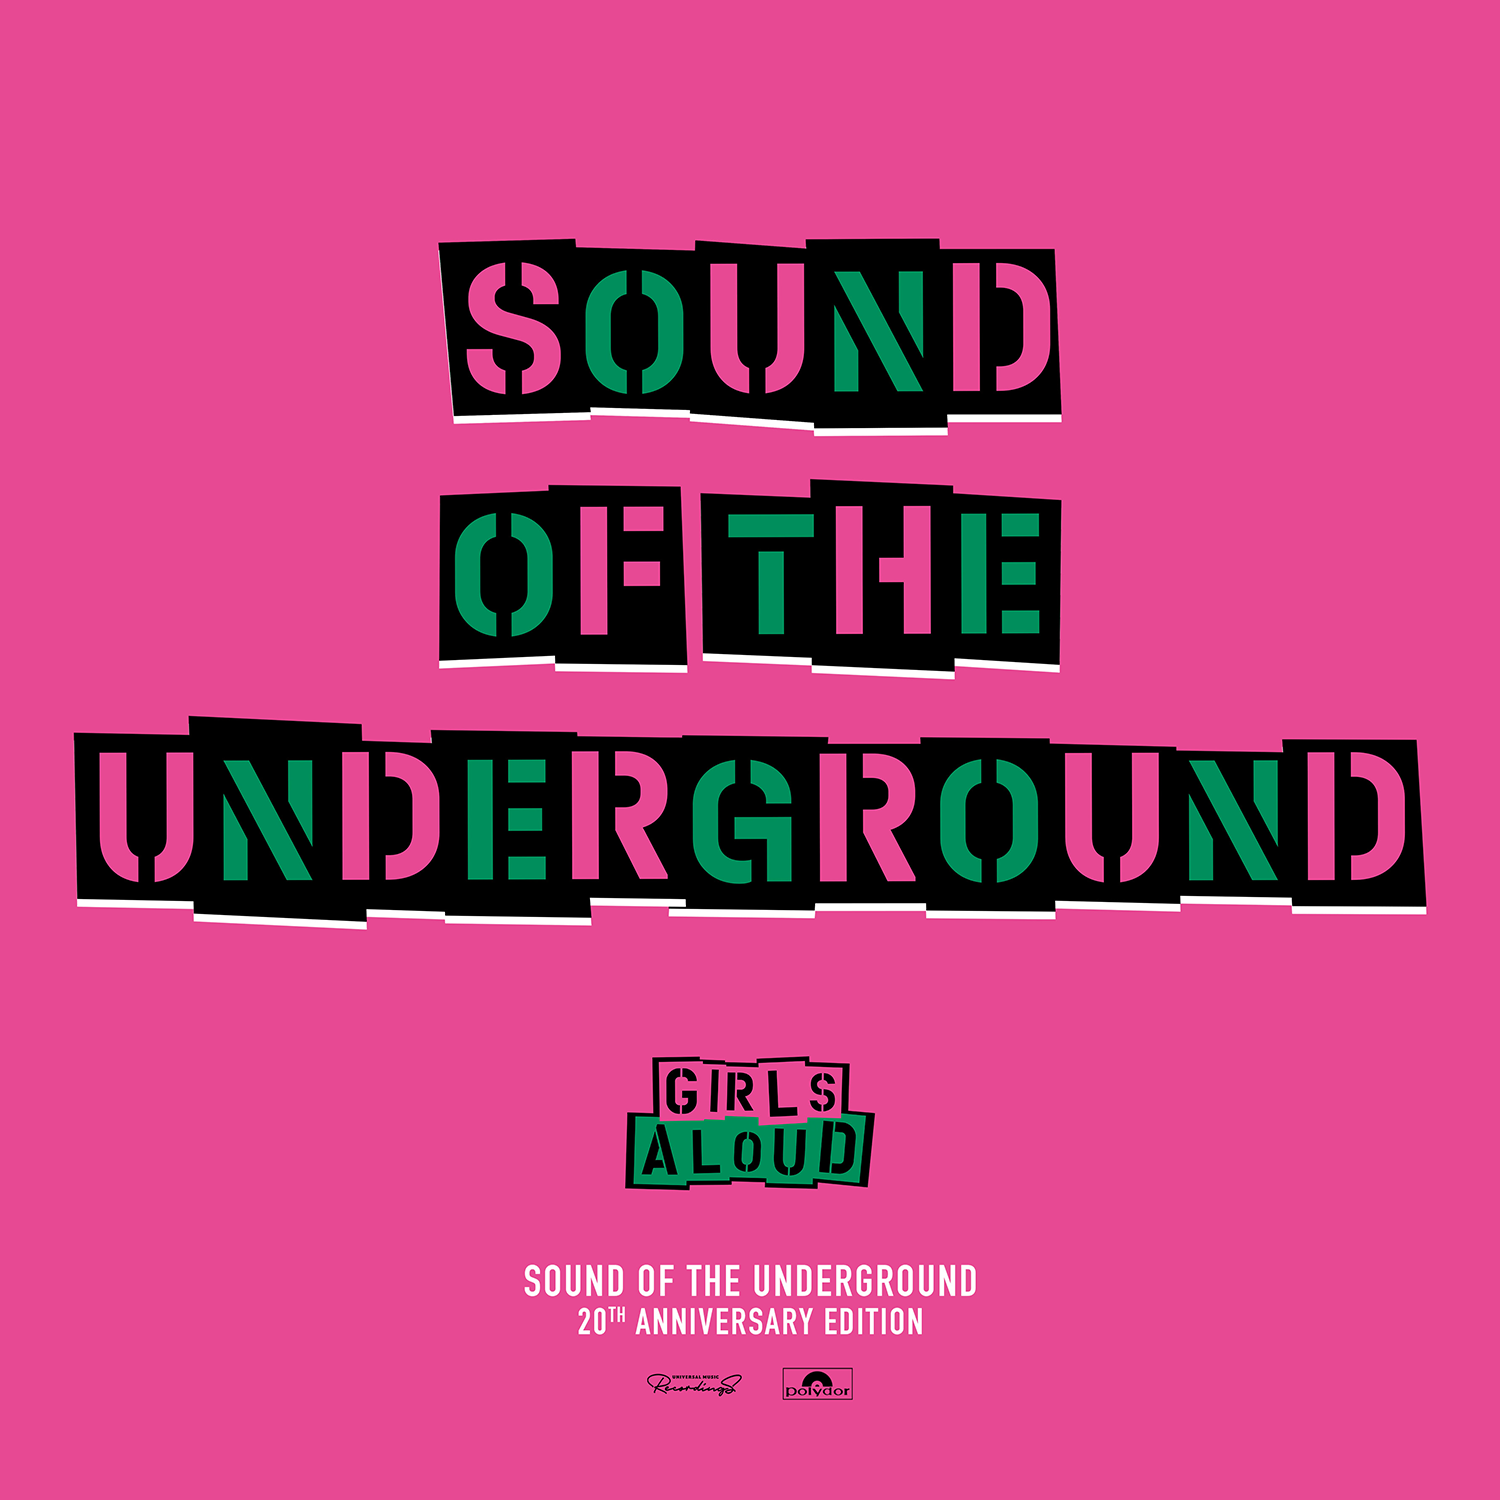 Sound Of The Underground (20th Anniversary Edition): Exclusive Picture Disc LP, Green LP, 3CD + 12" Print